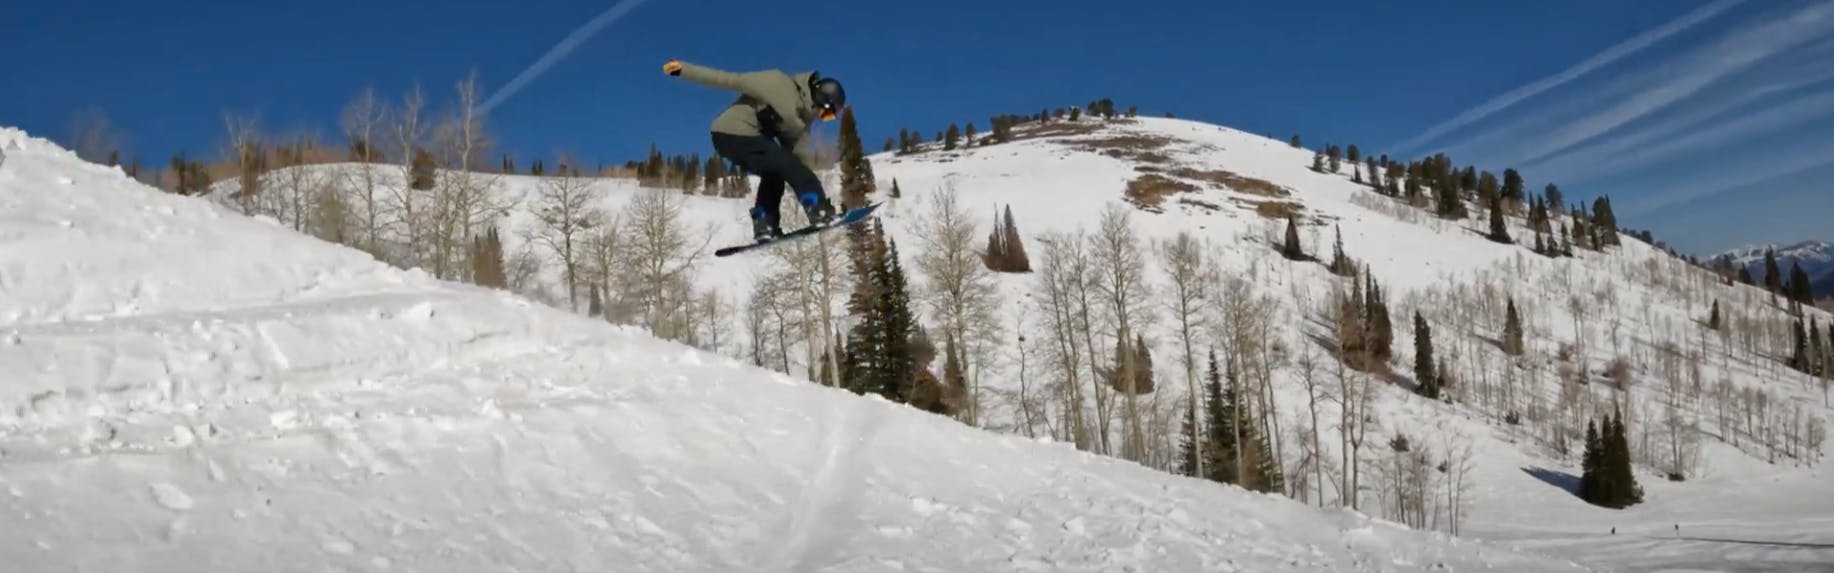 Snowboard Expert Spencer Storck jumping with the GNU Antigravity snowboard